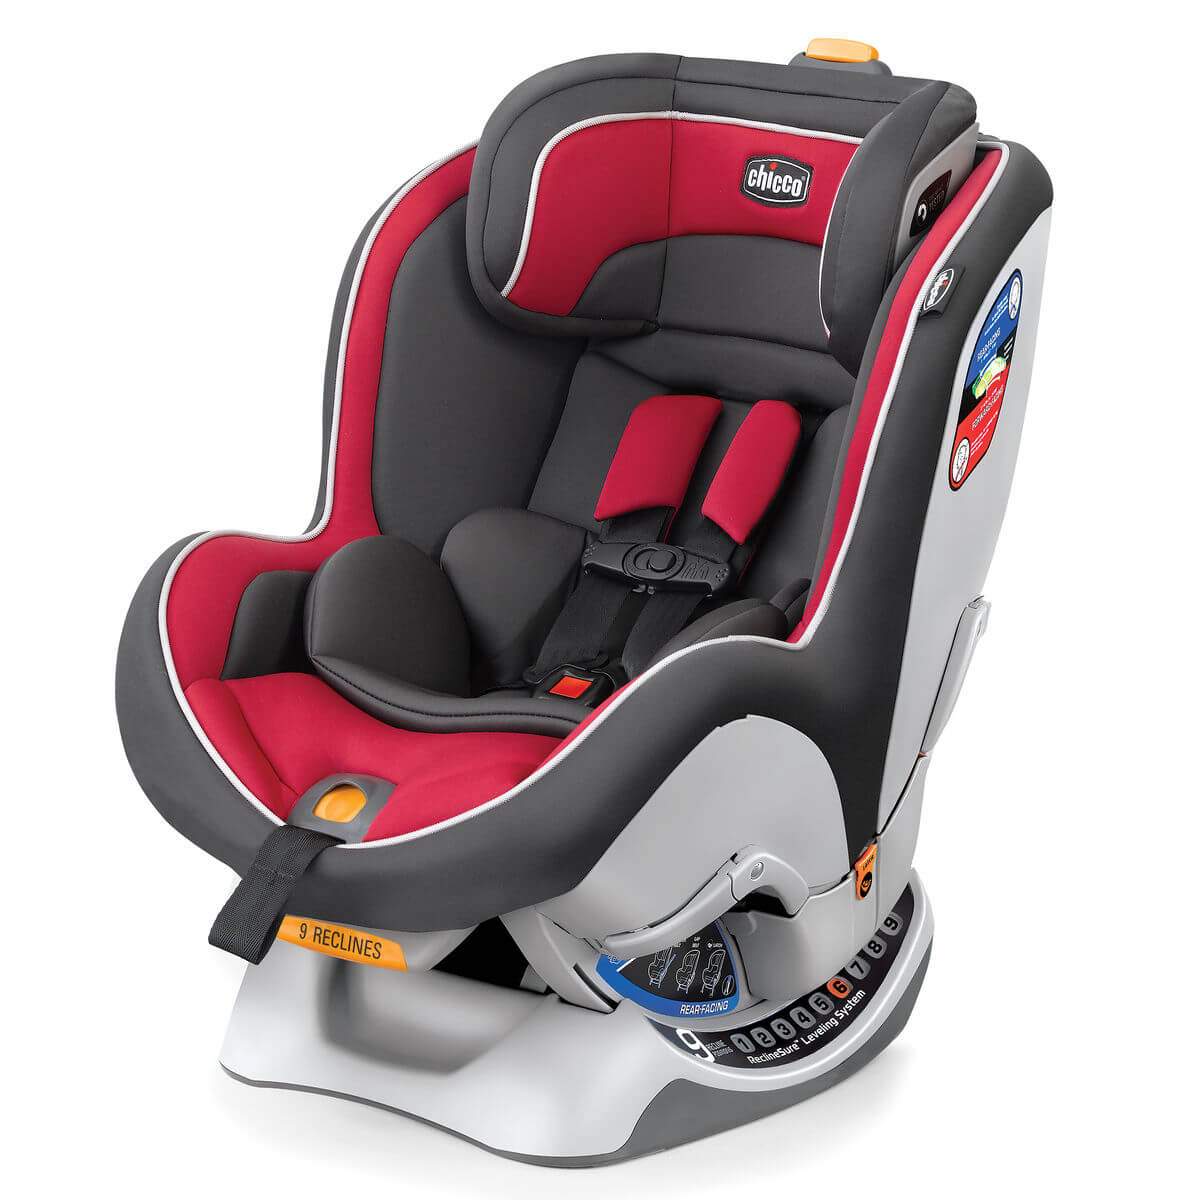 Best Convertible Safety Seat - Chicco